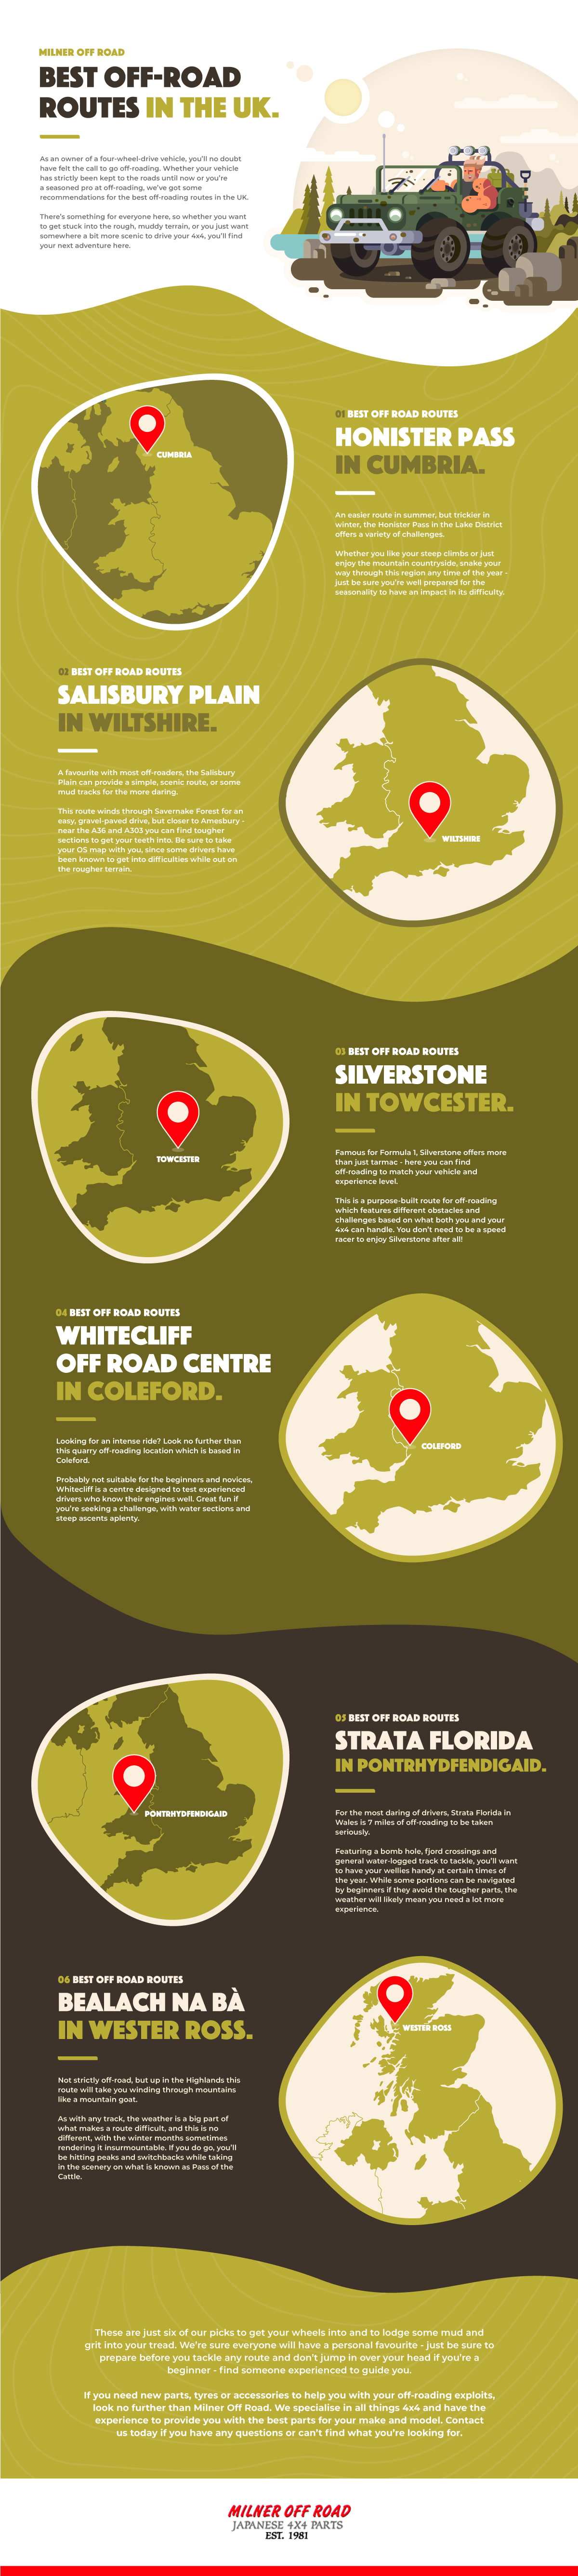 Best off-road routes in the UK (infographic)